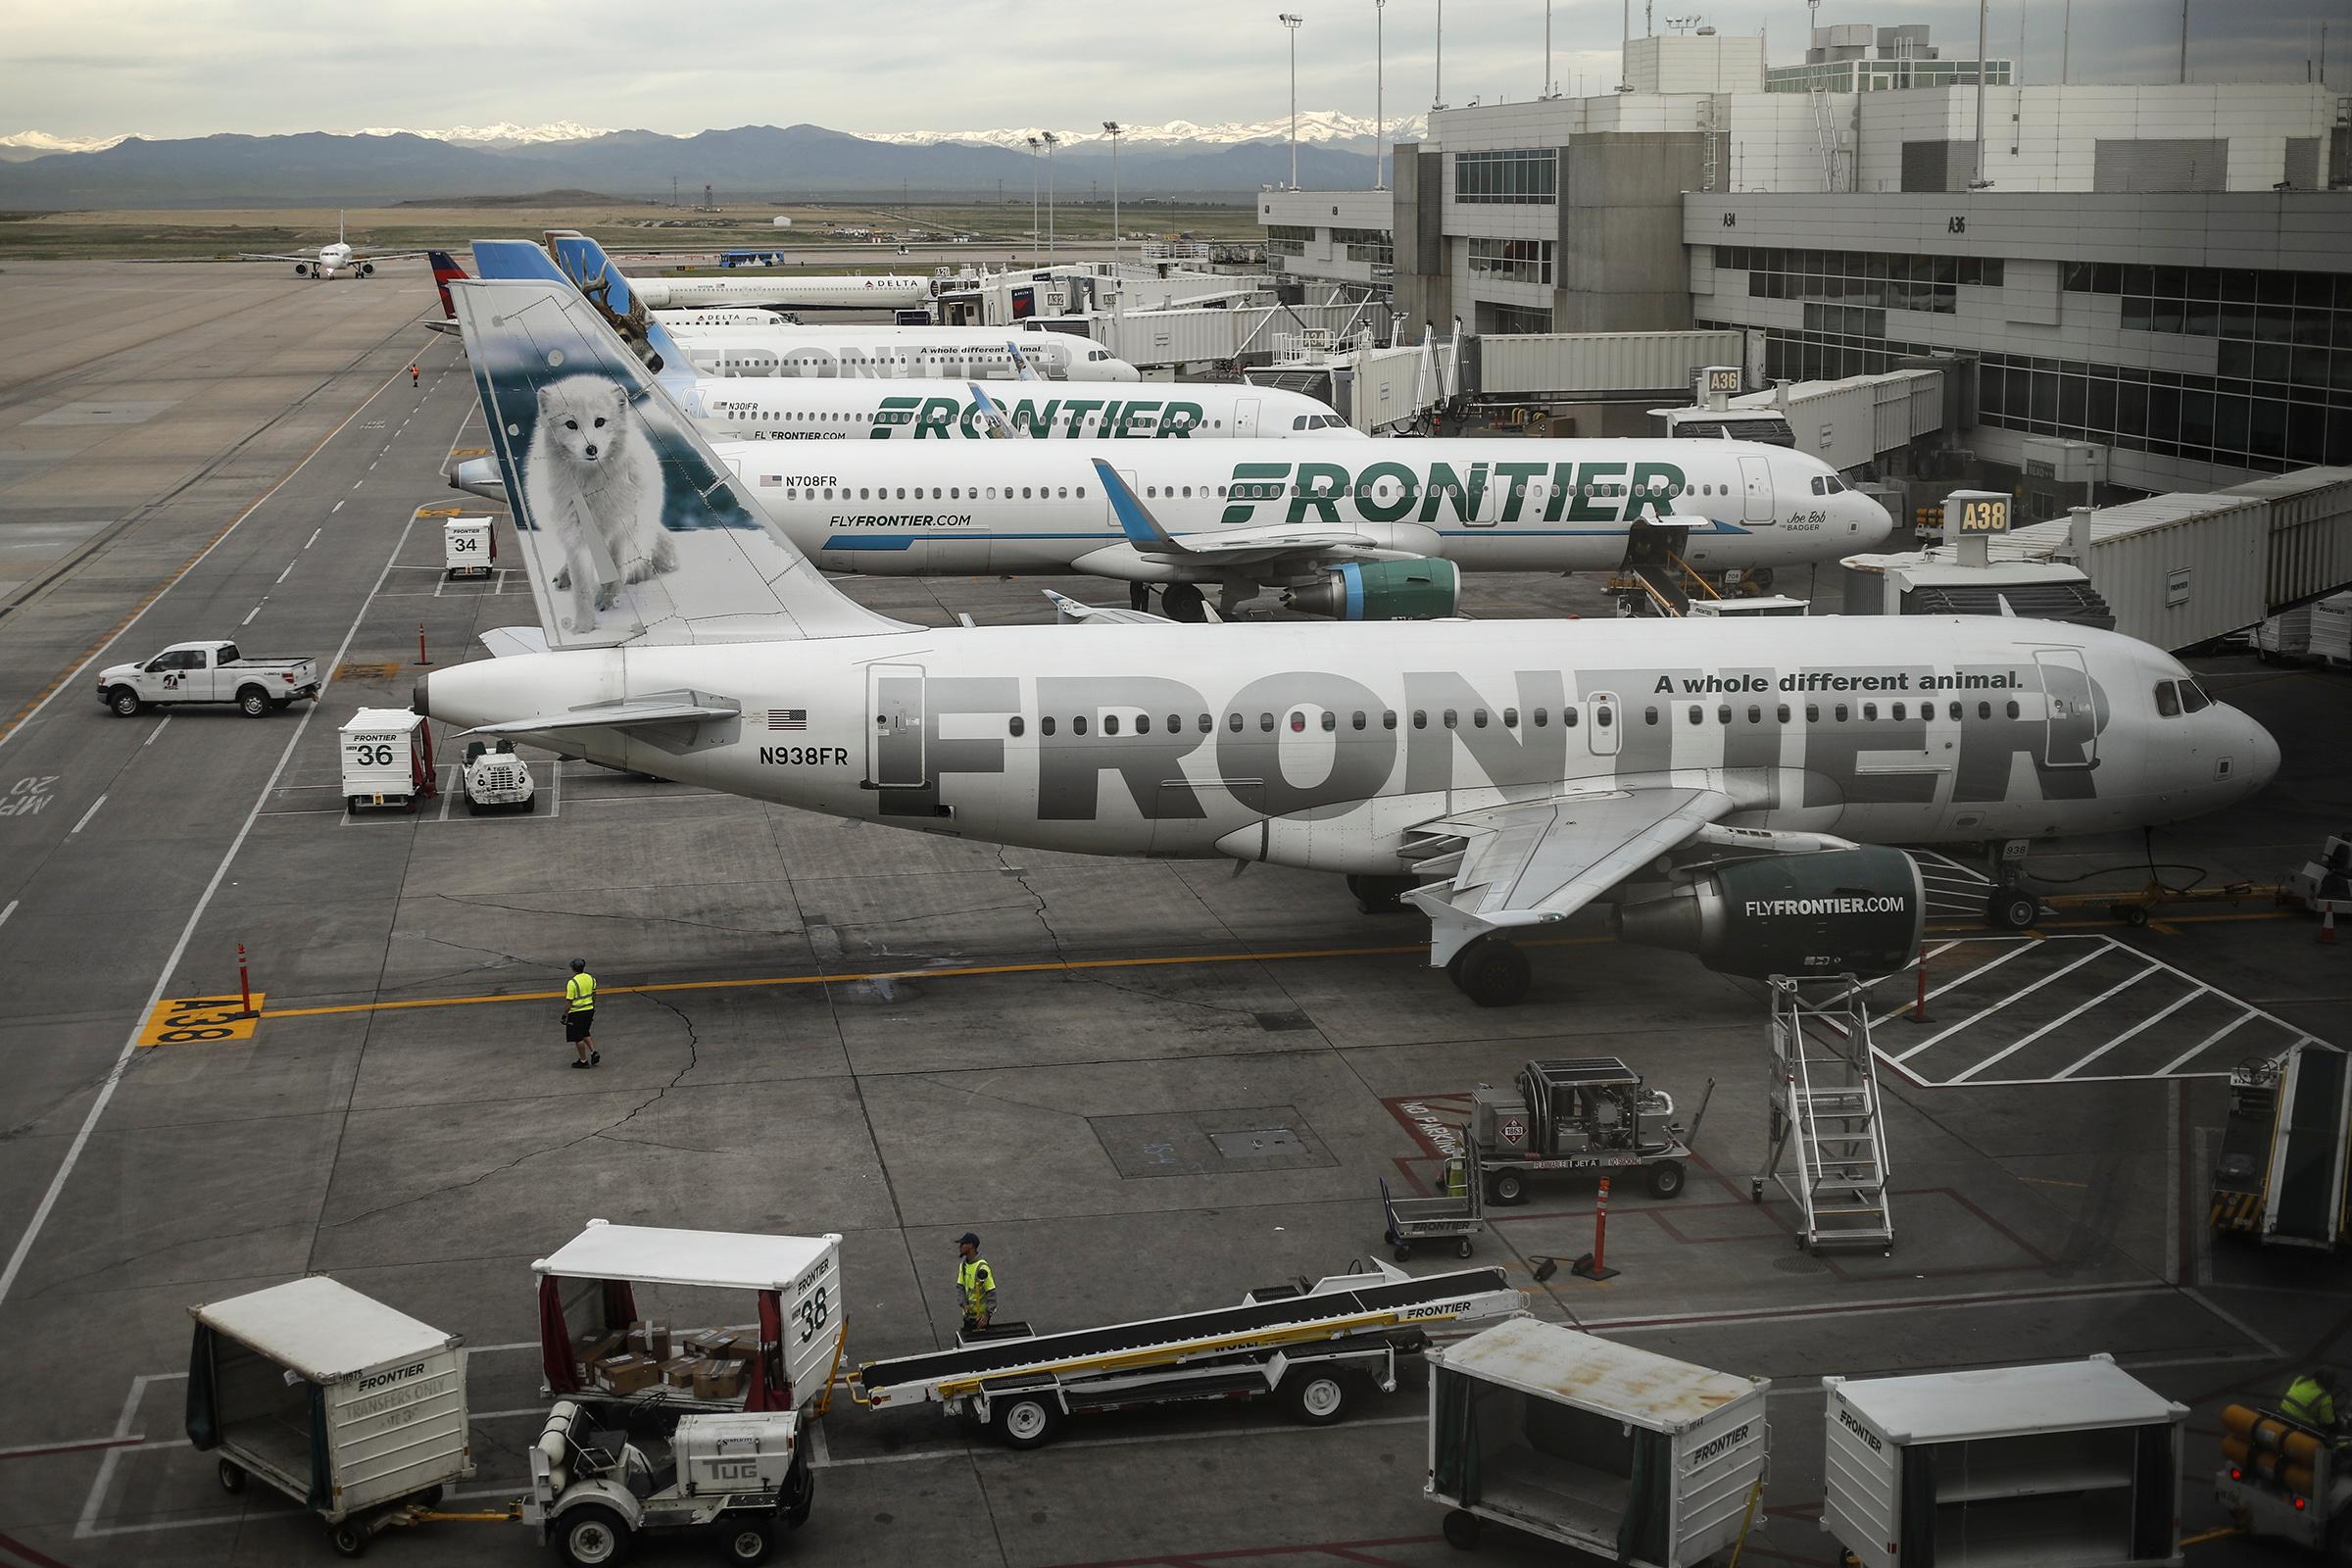 Photo: Frontier Airlines plane at DIA